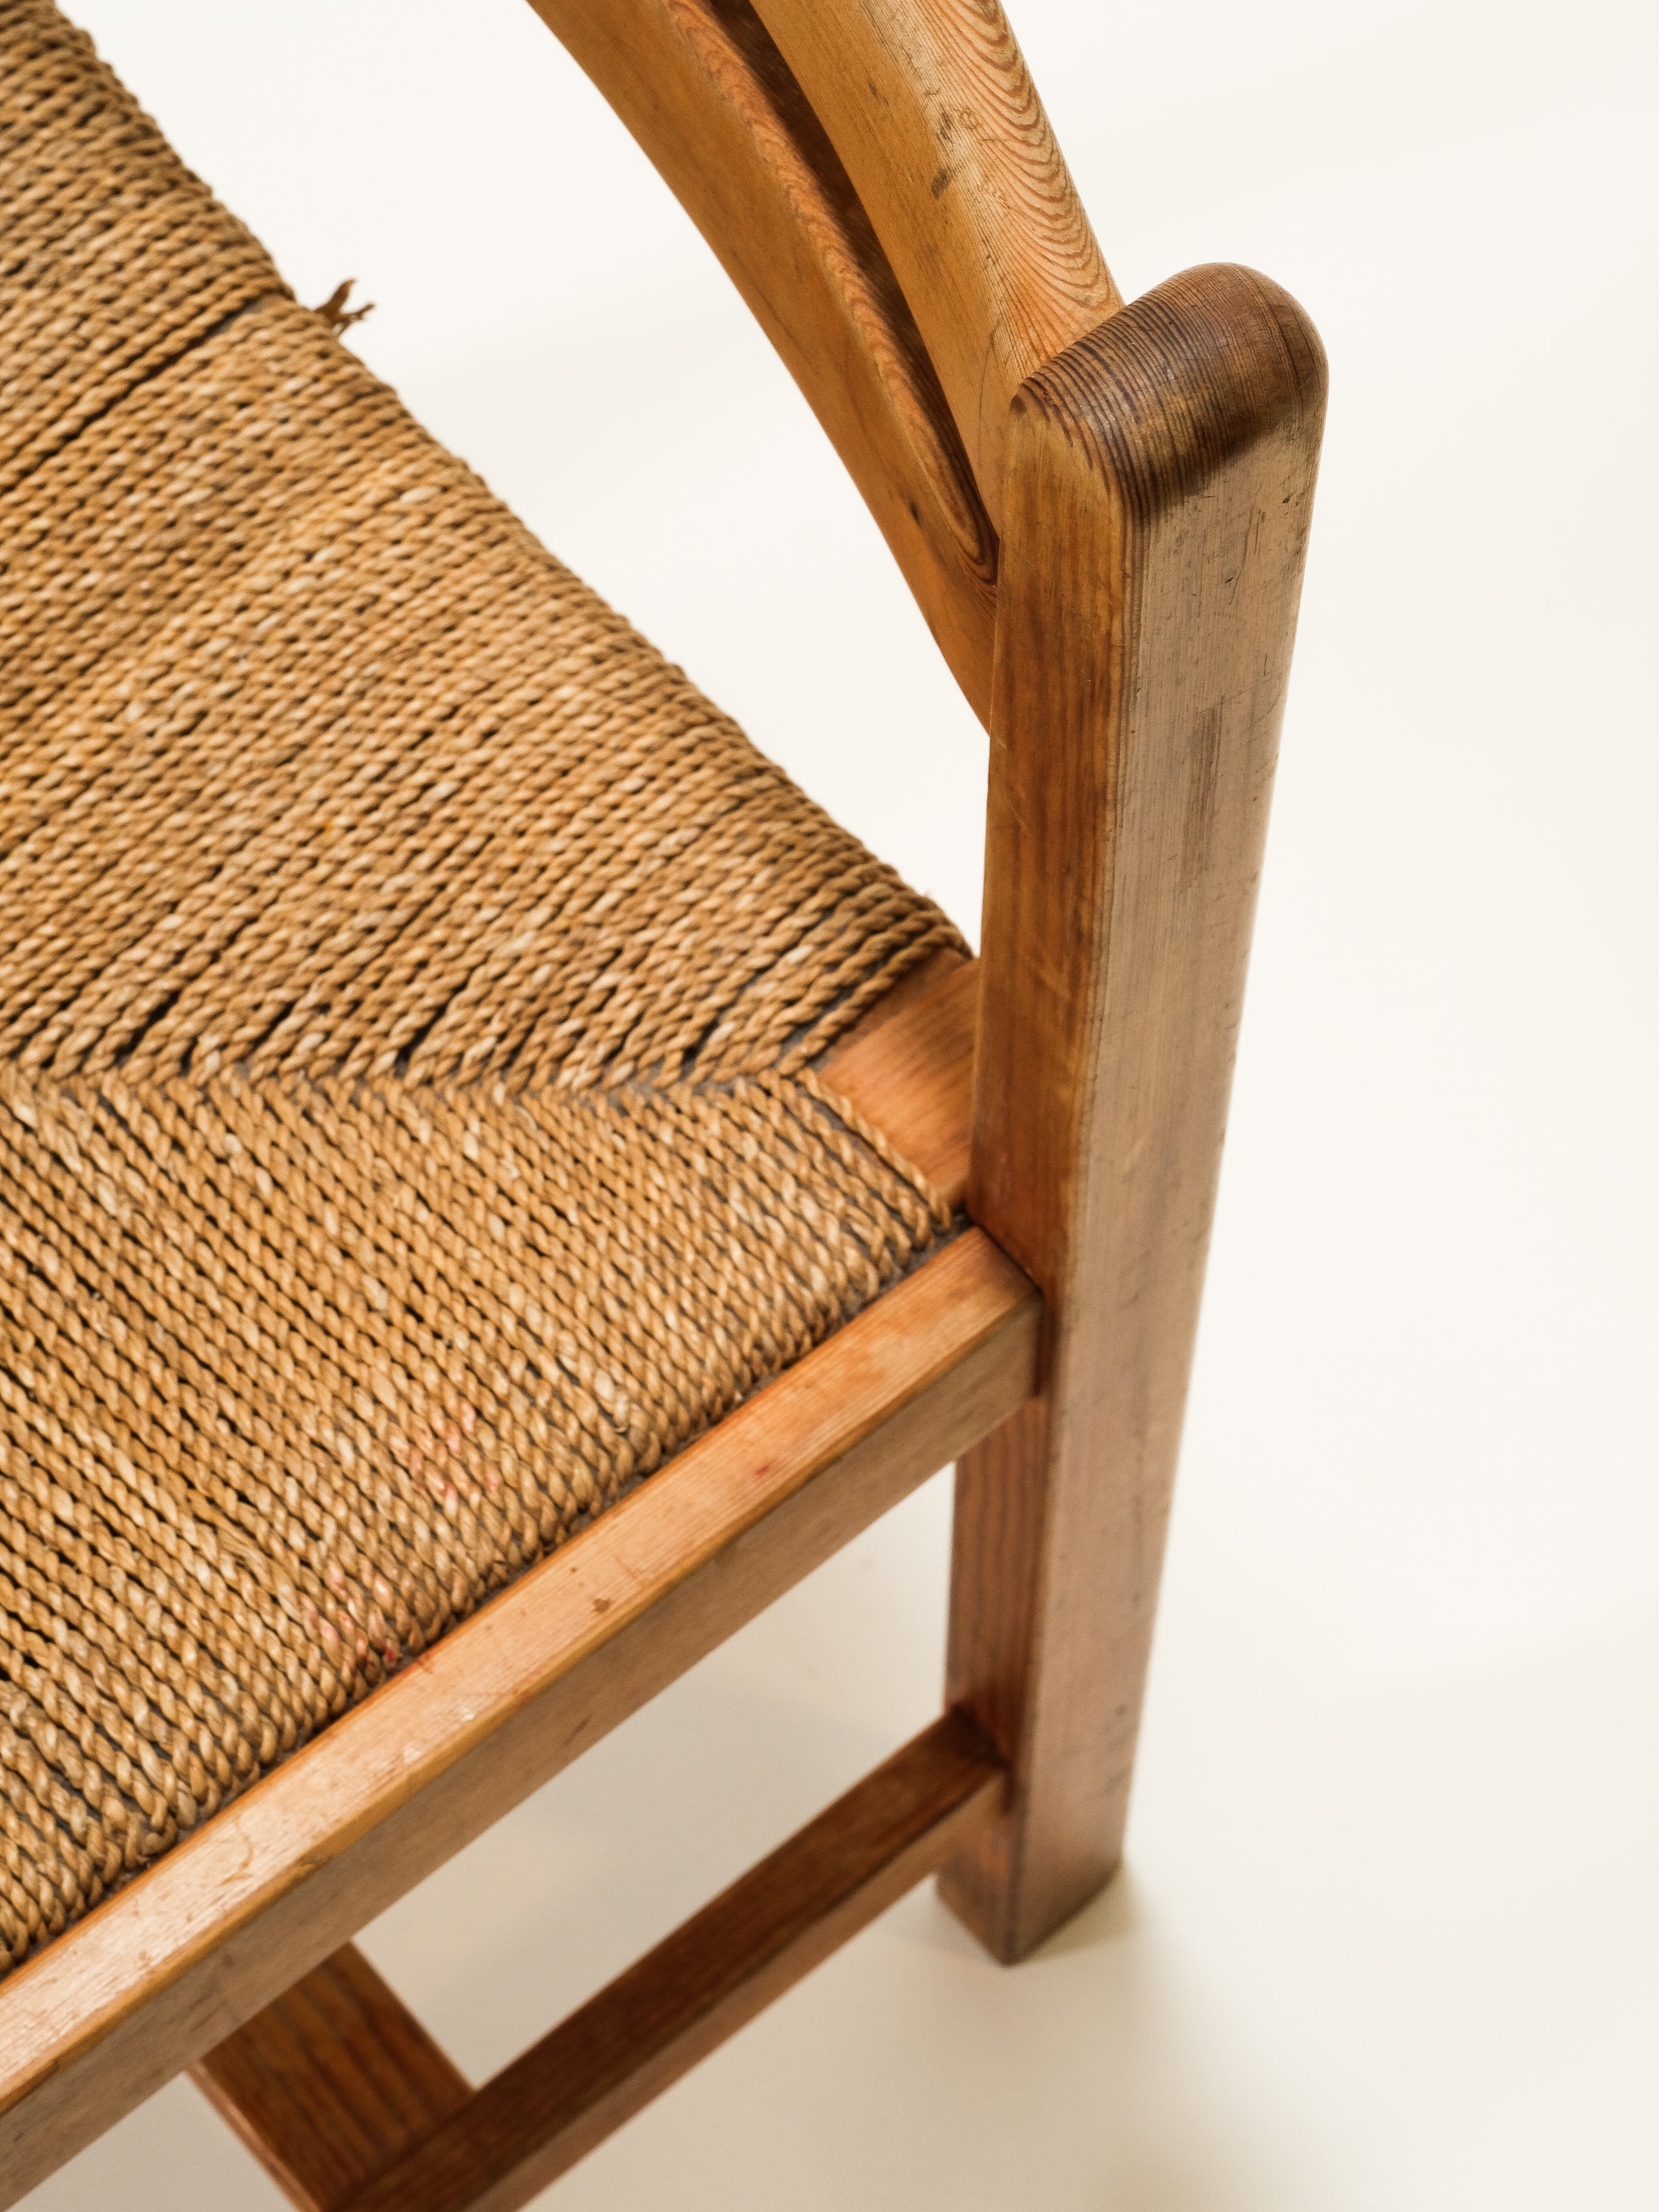 "Asserbo" Pine & Papercord Chair by Børge Mogensen for Karl Andersson & Söner